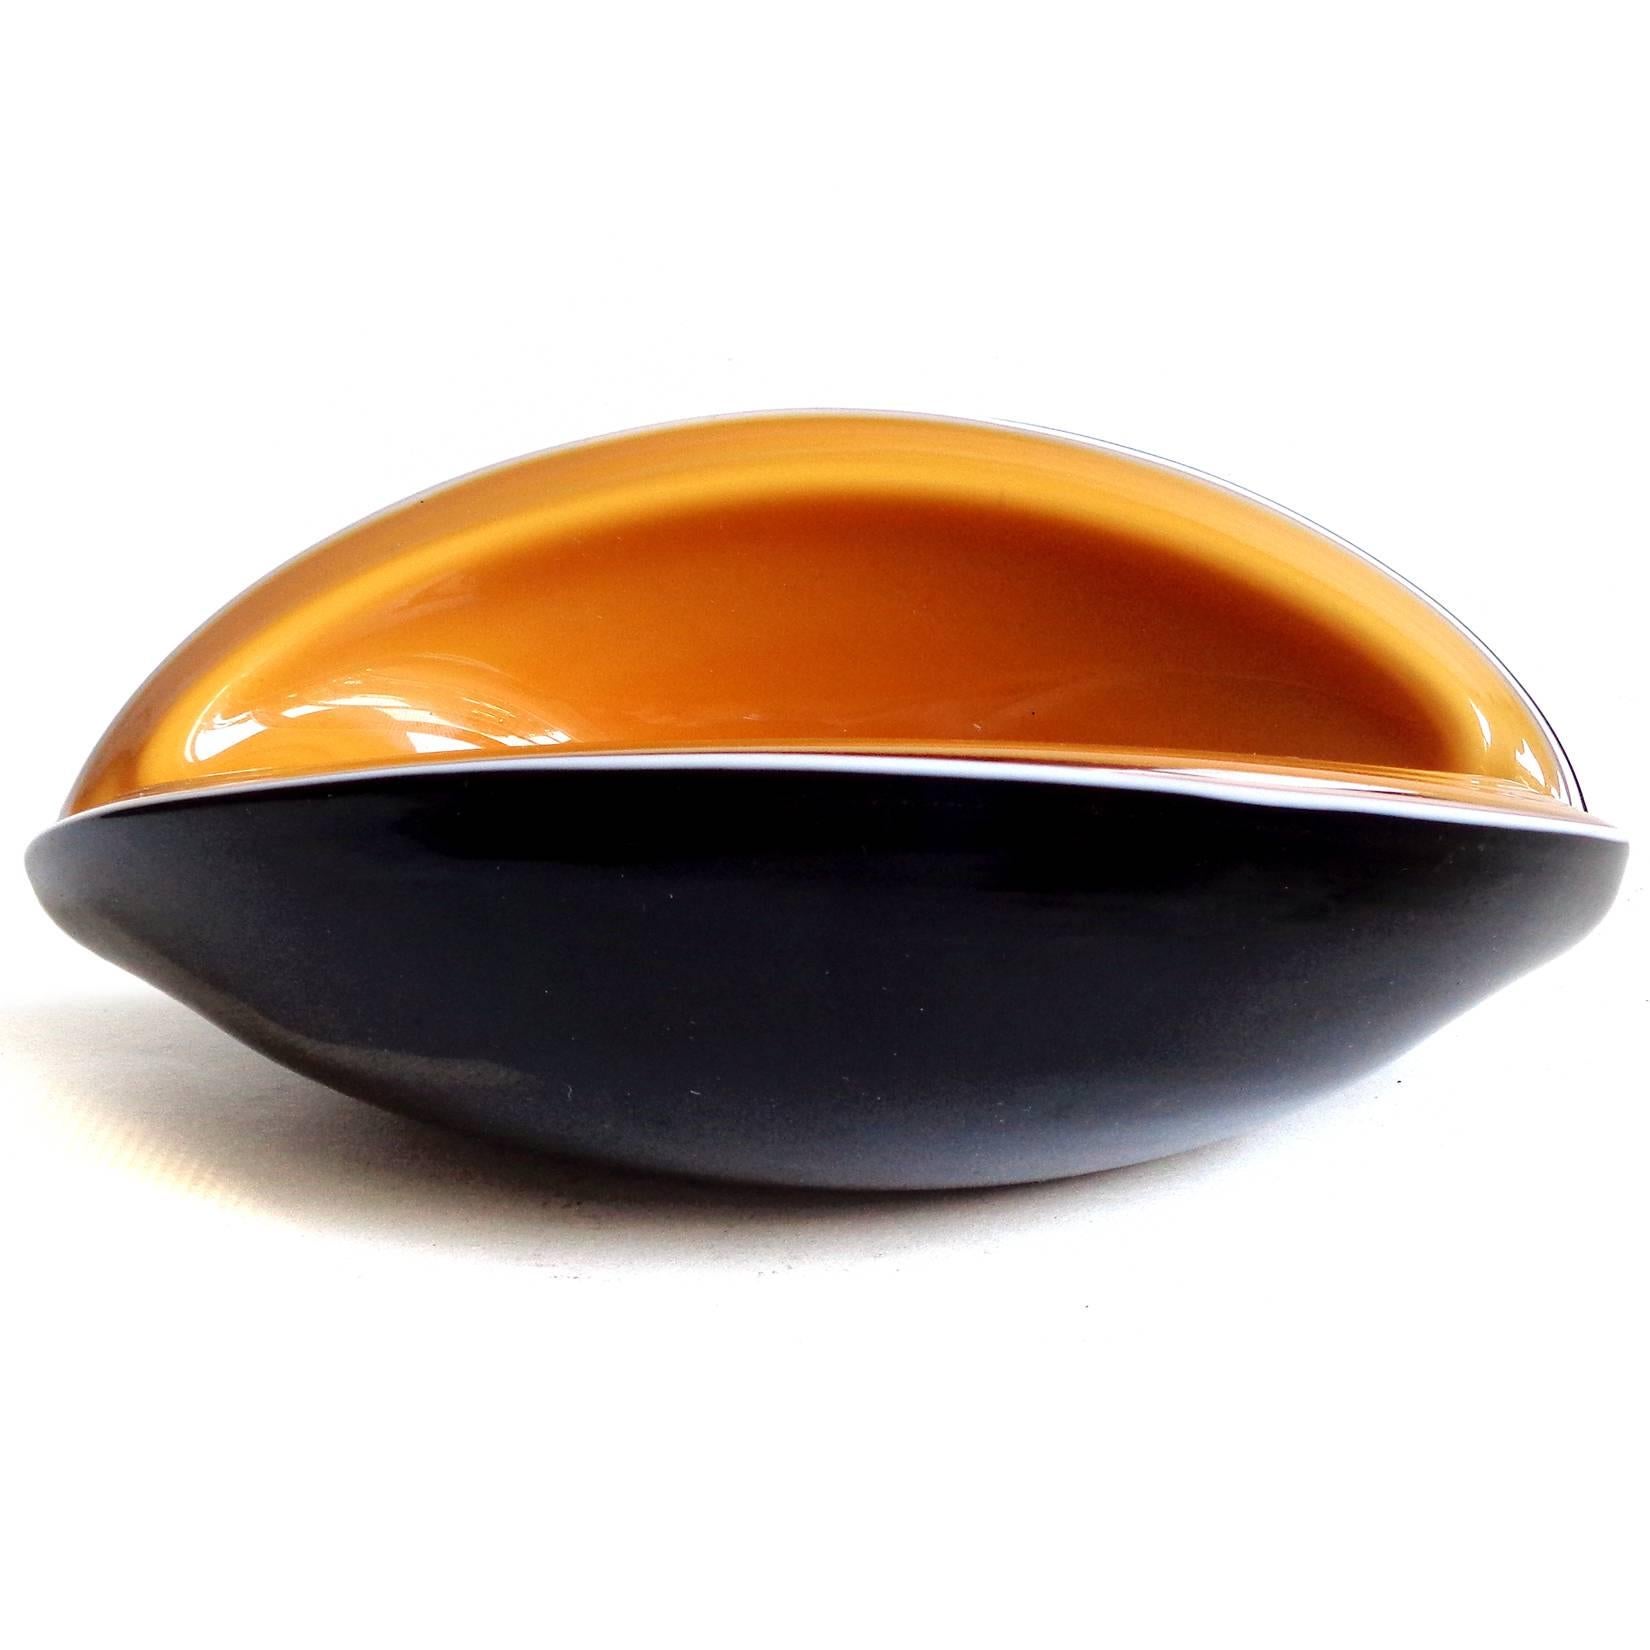 Free shipping worldwide! See details below description.

Striking Murano handblown black over white, and pumpkin orange art glass melon cut bowl. Documented to designer Alfredo Barbini. The bowl is cut at an angle on both sides, with small indents